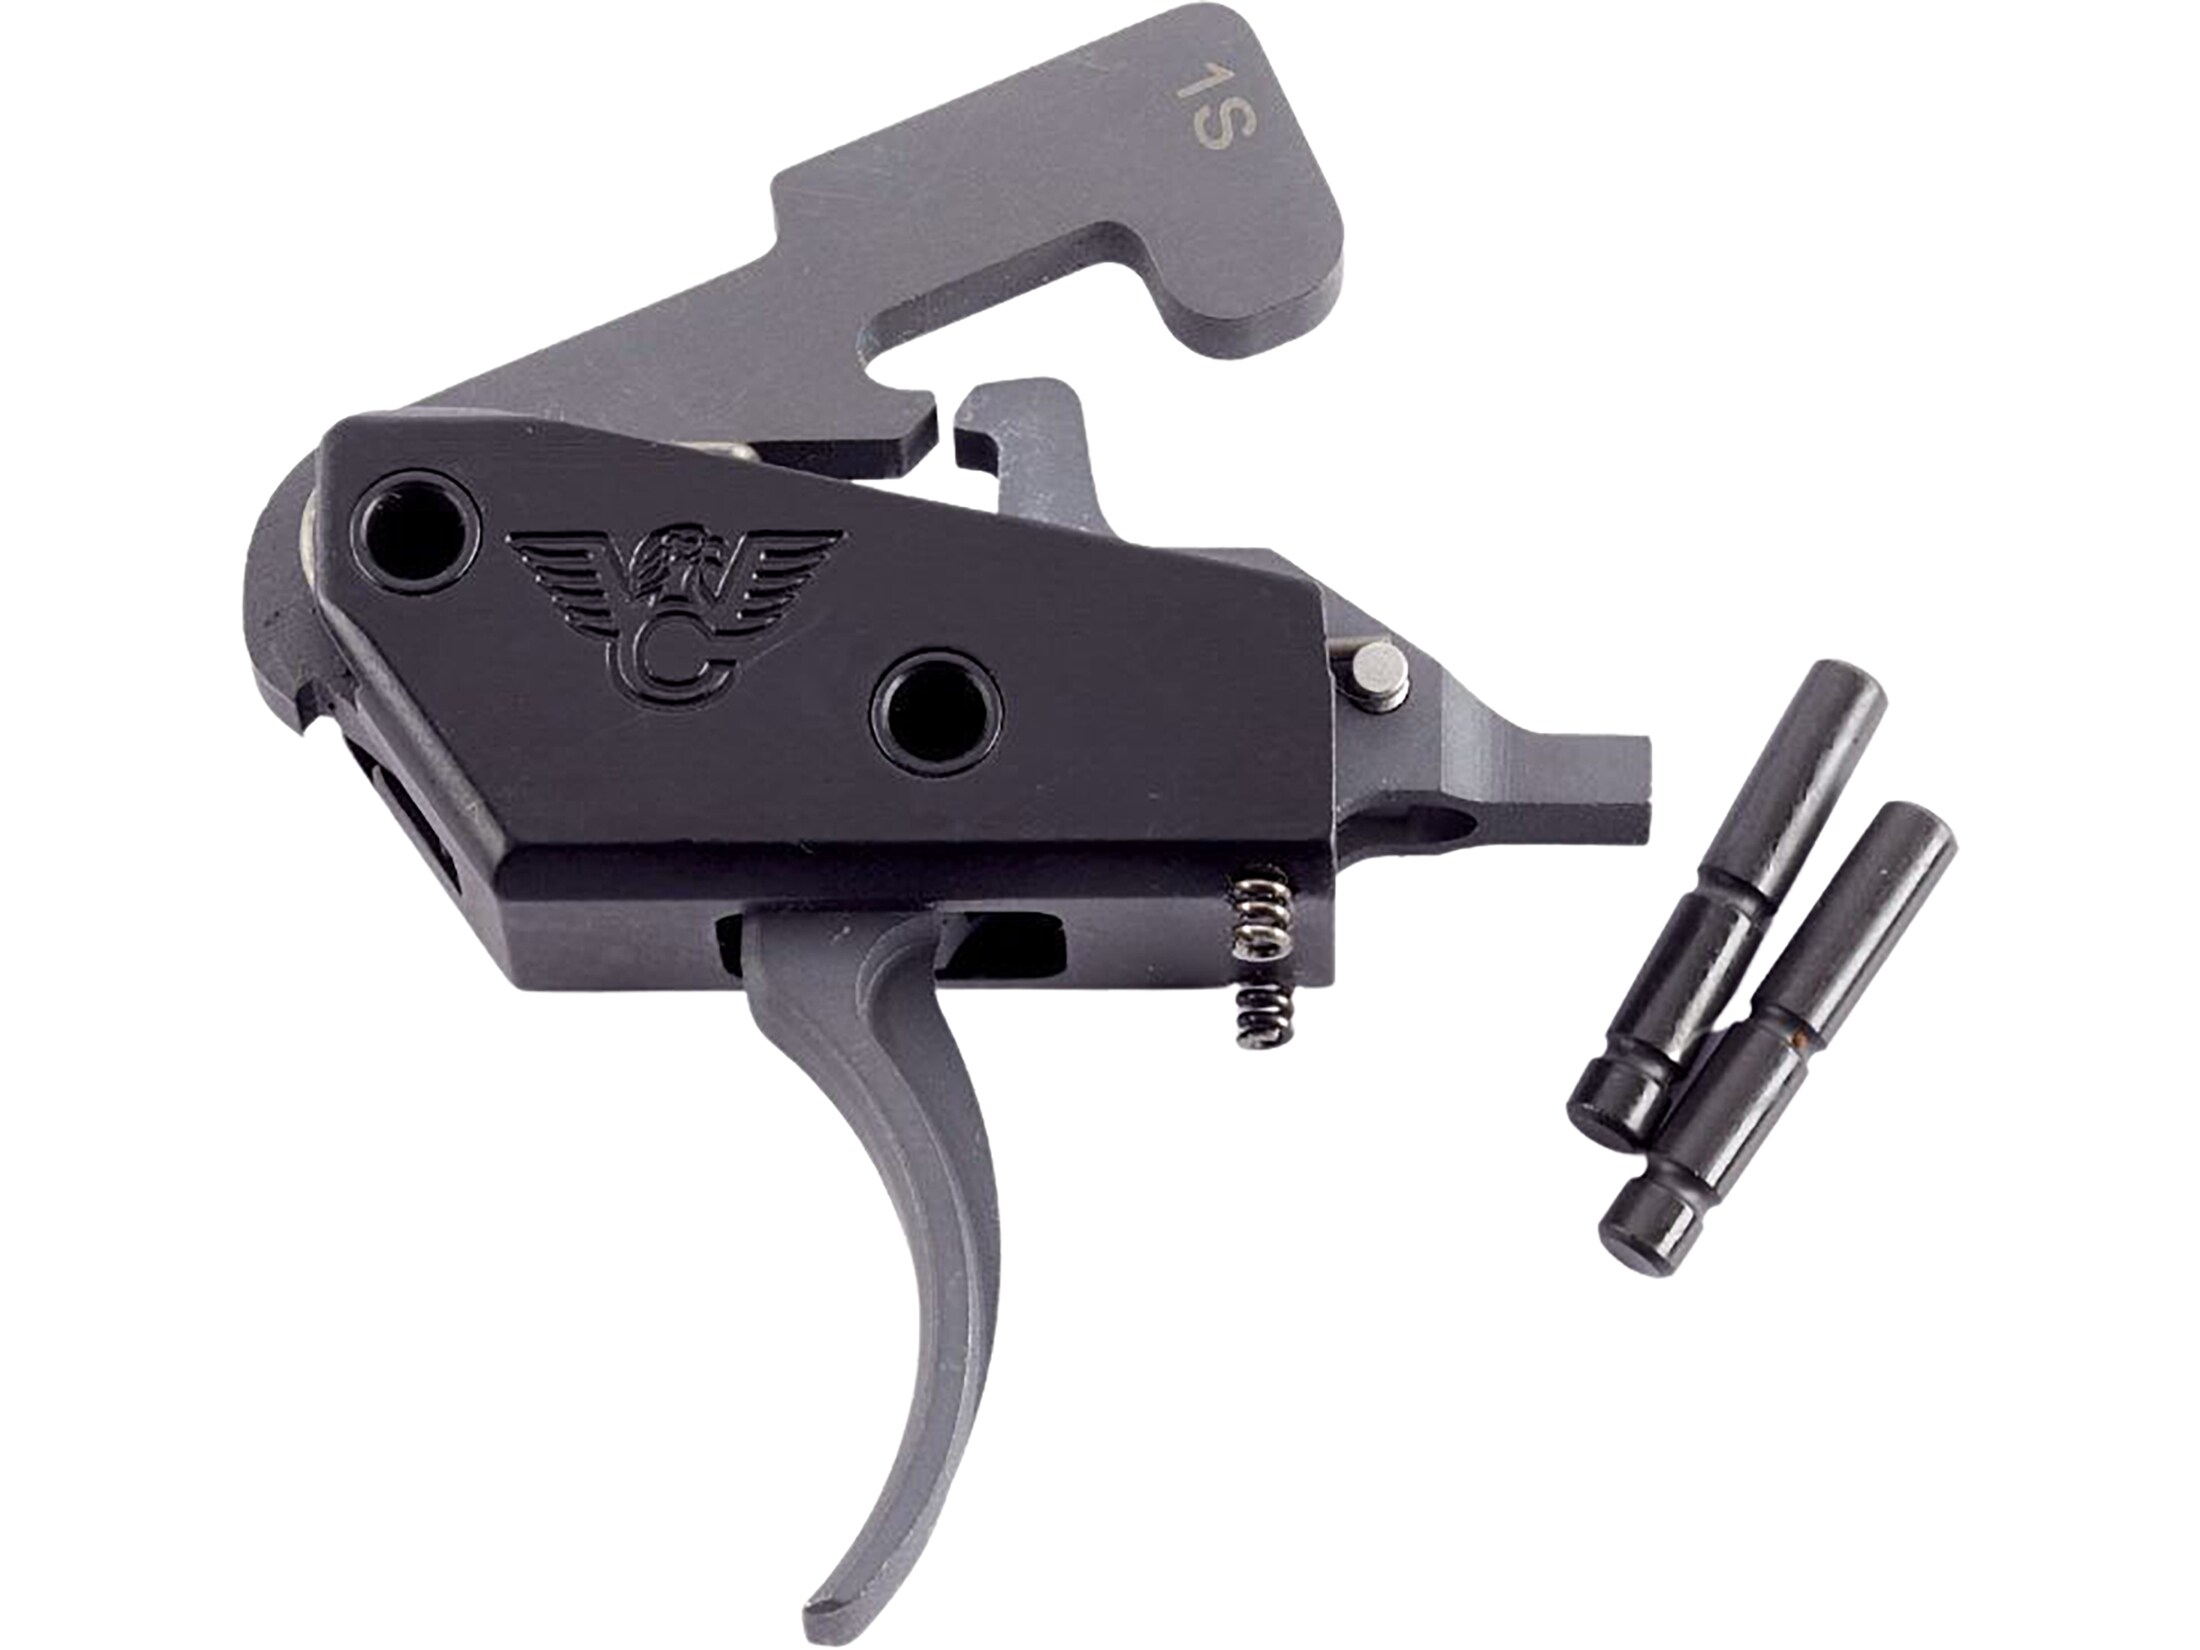 This drop-in trigger provides the operator with a crisp, positive trigger w...